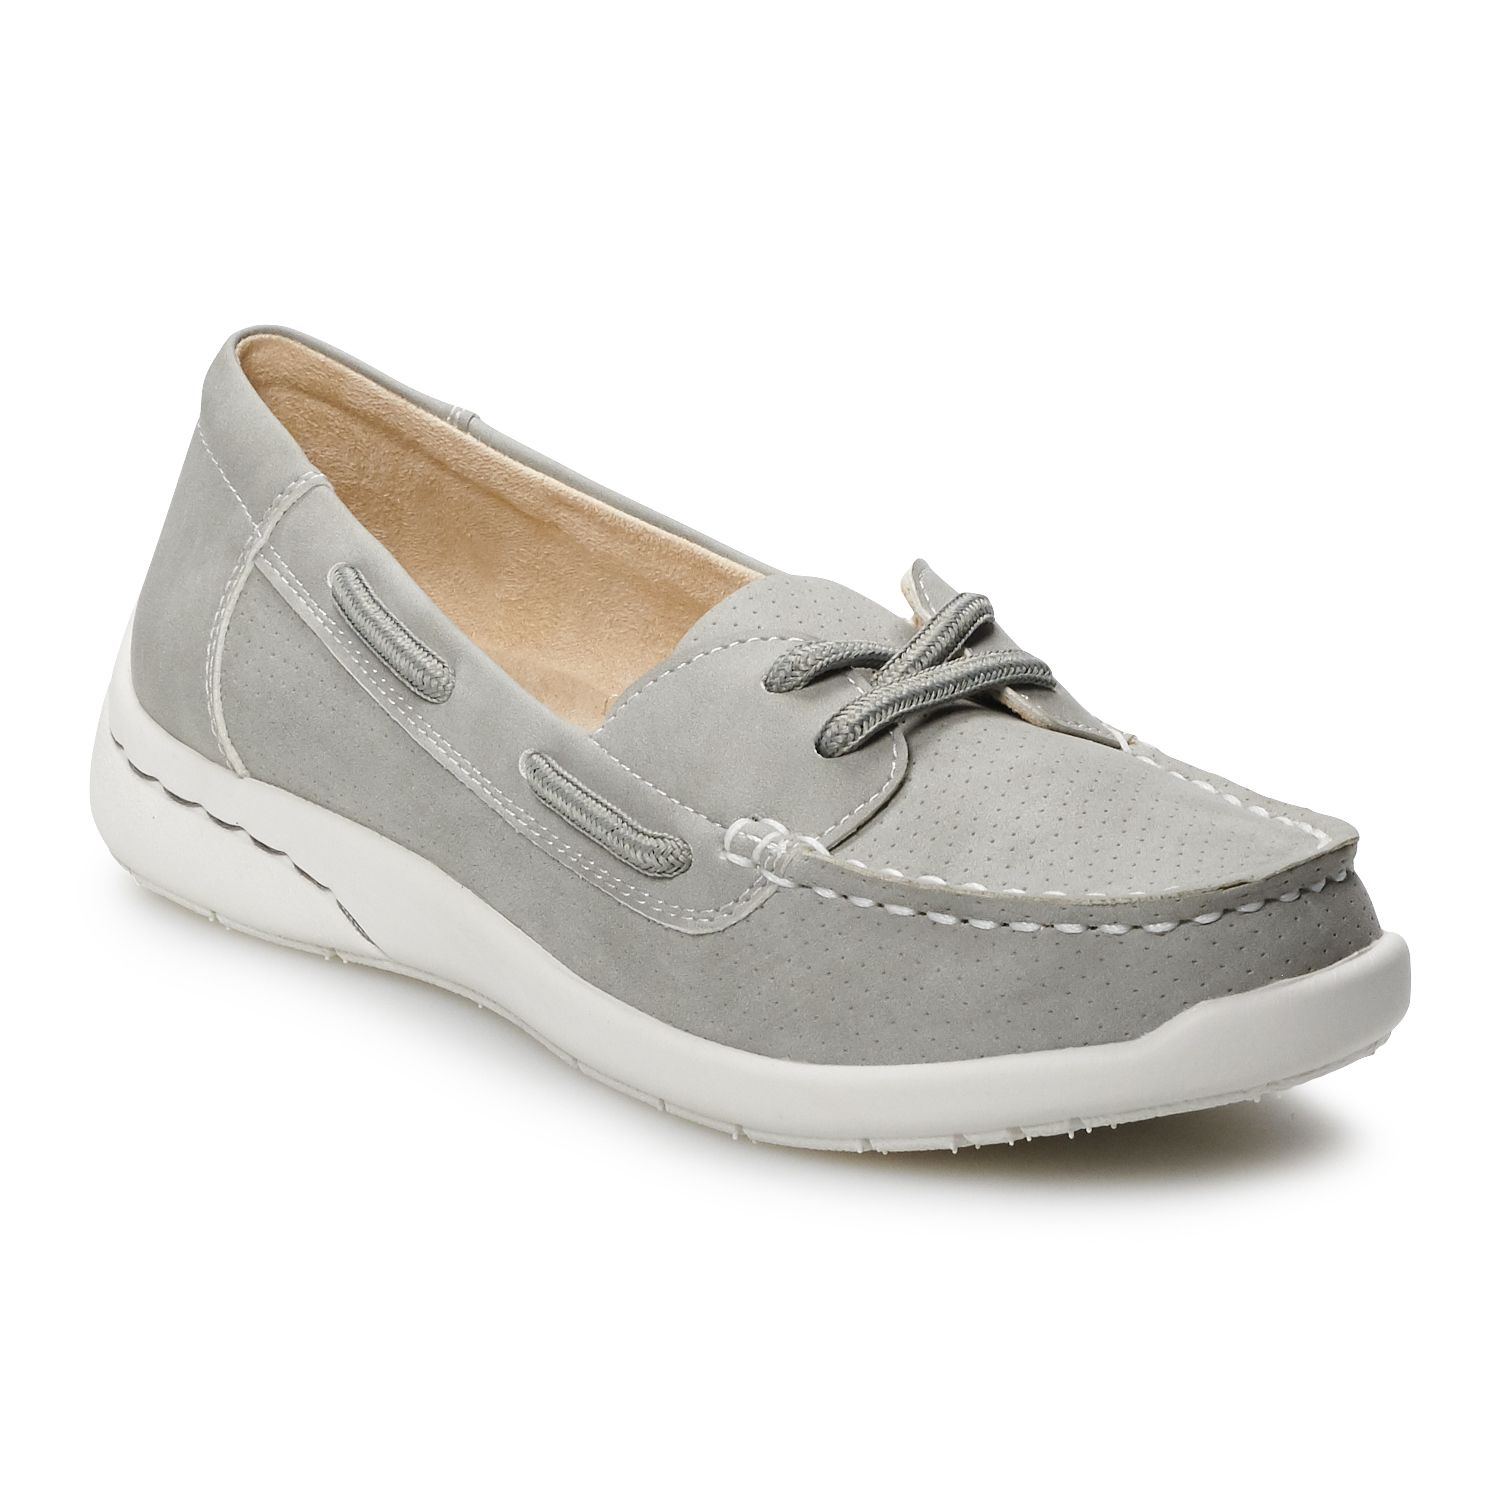 next boat shoes womens